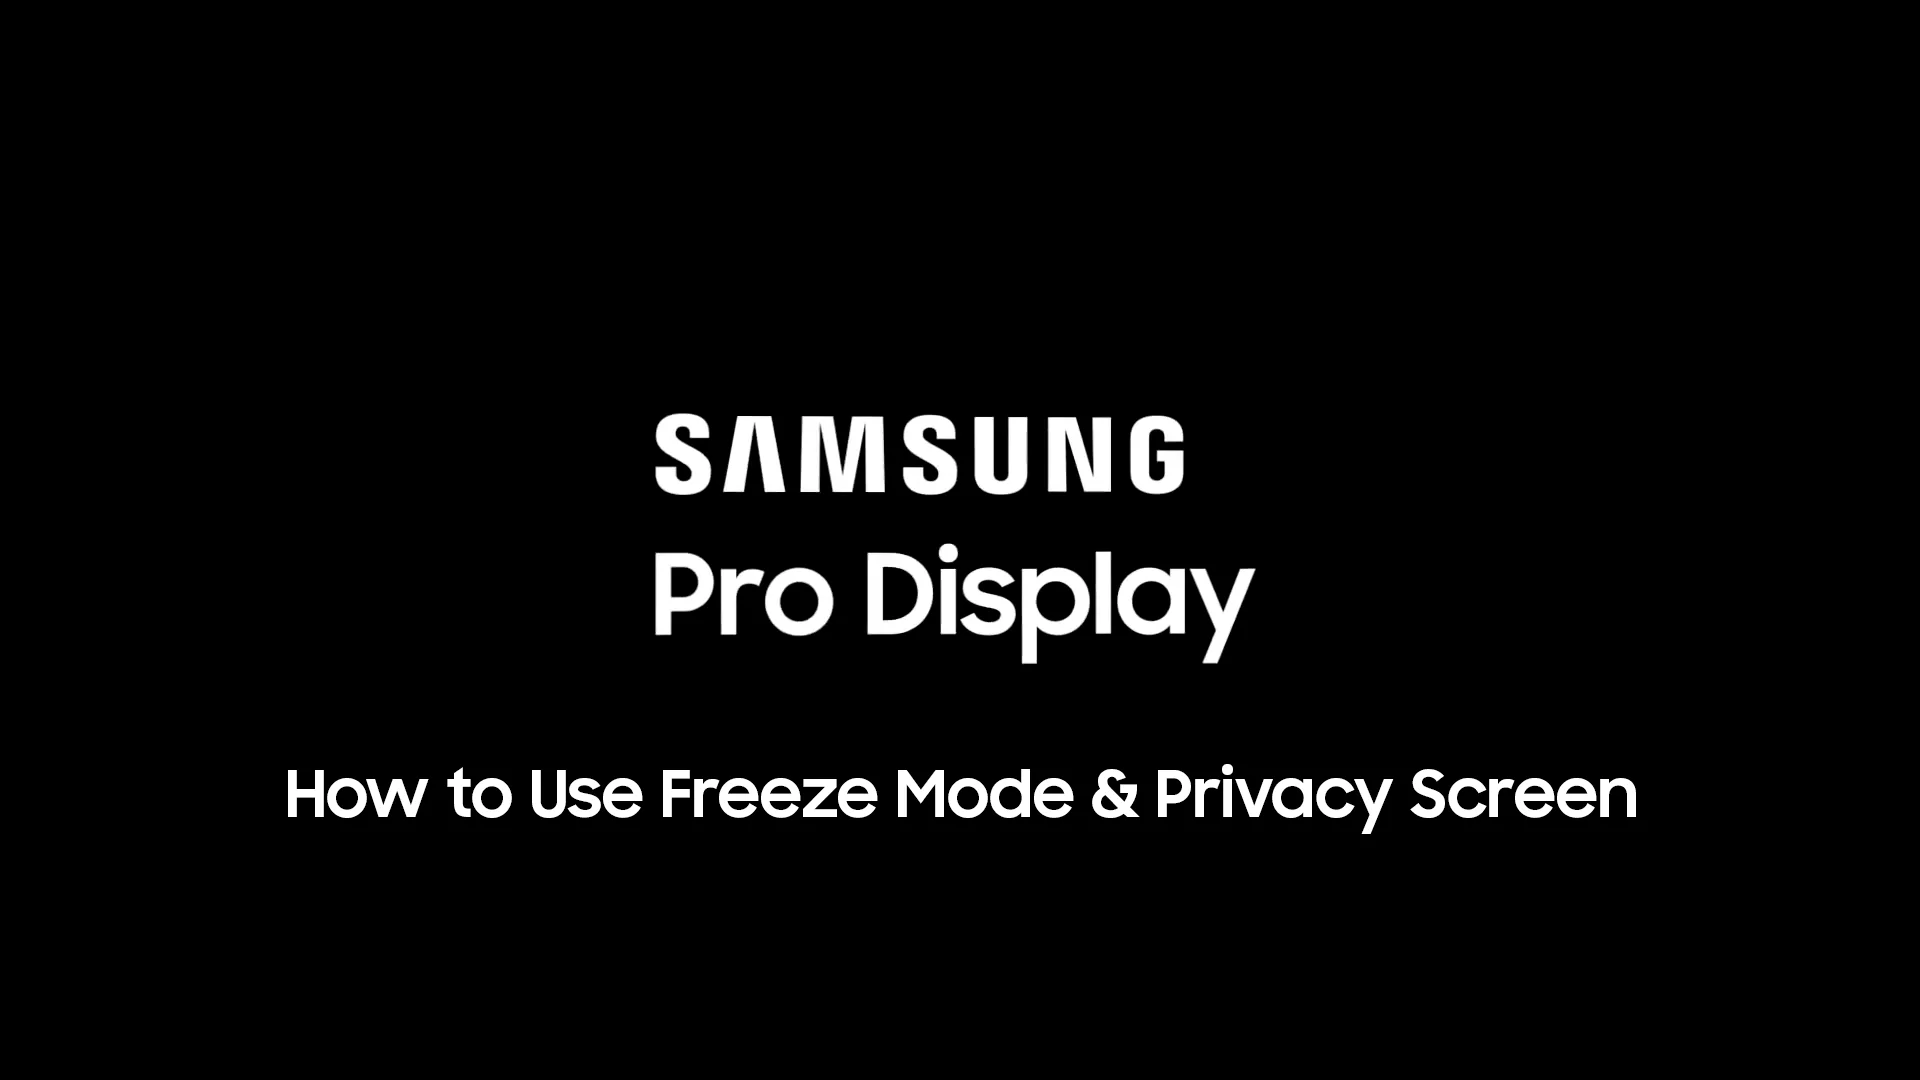 Samsung Flip Interactive Display - How to Use Freeze Mode and